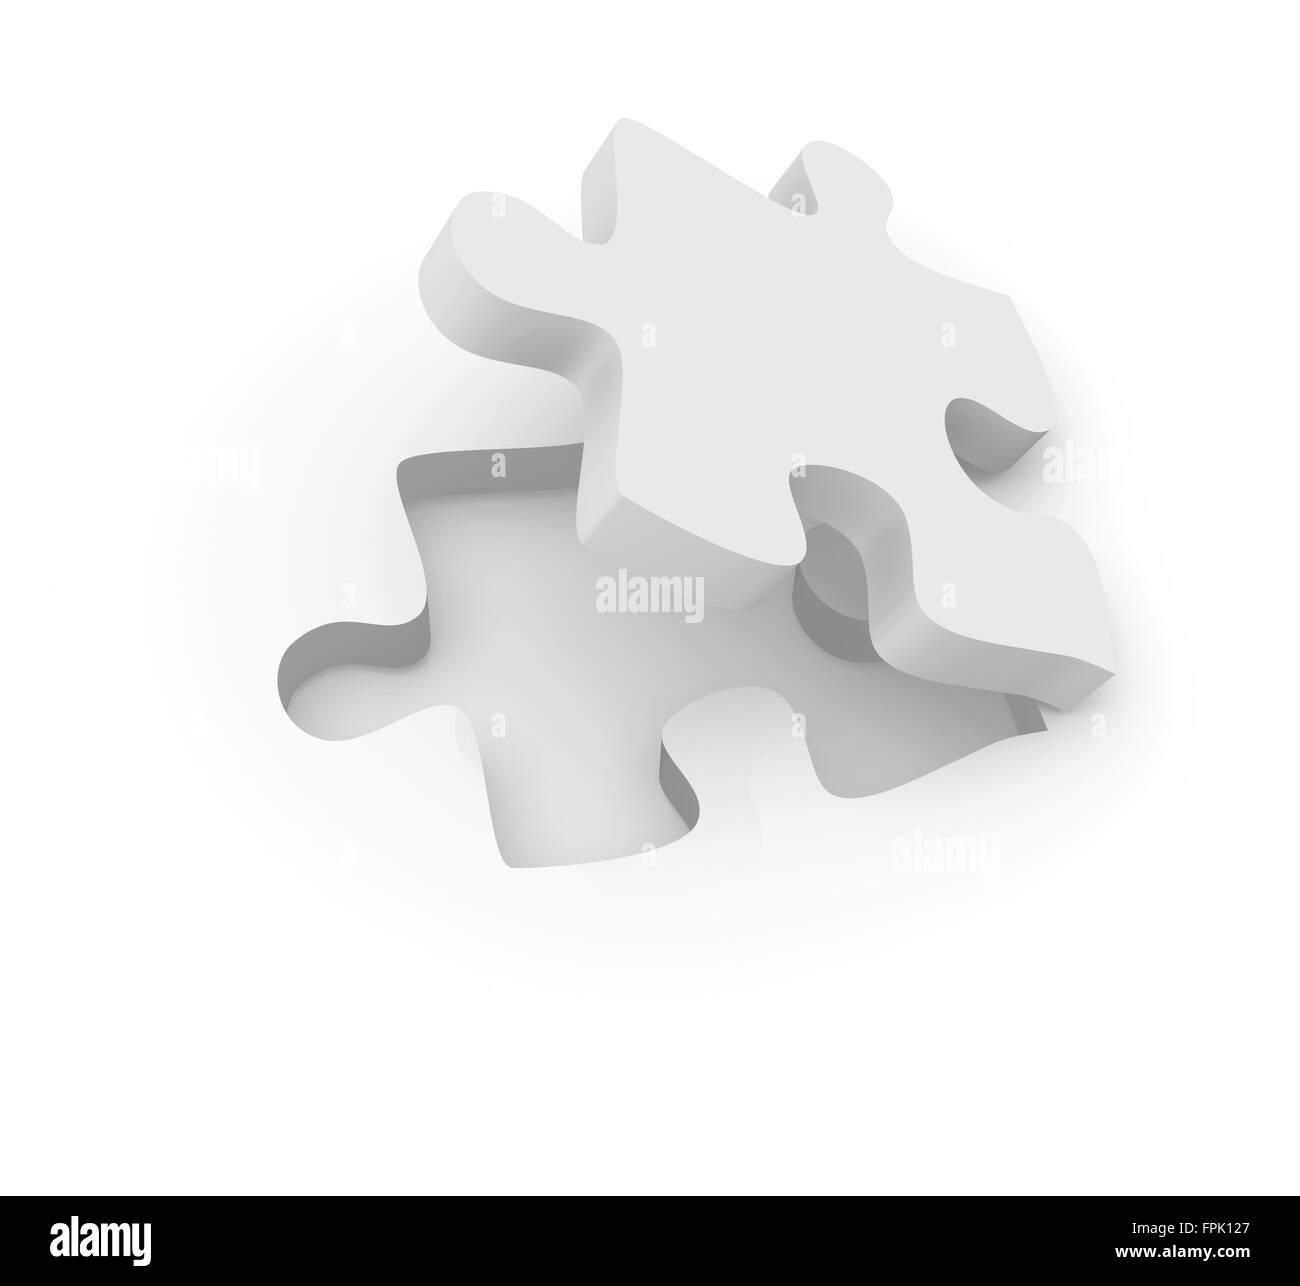 Puzzle Piece , 3d rendered image Stock Photo - Alamy